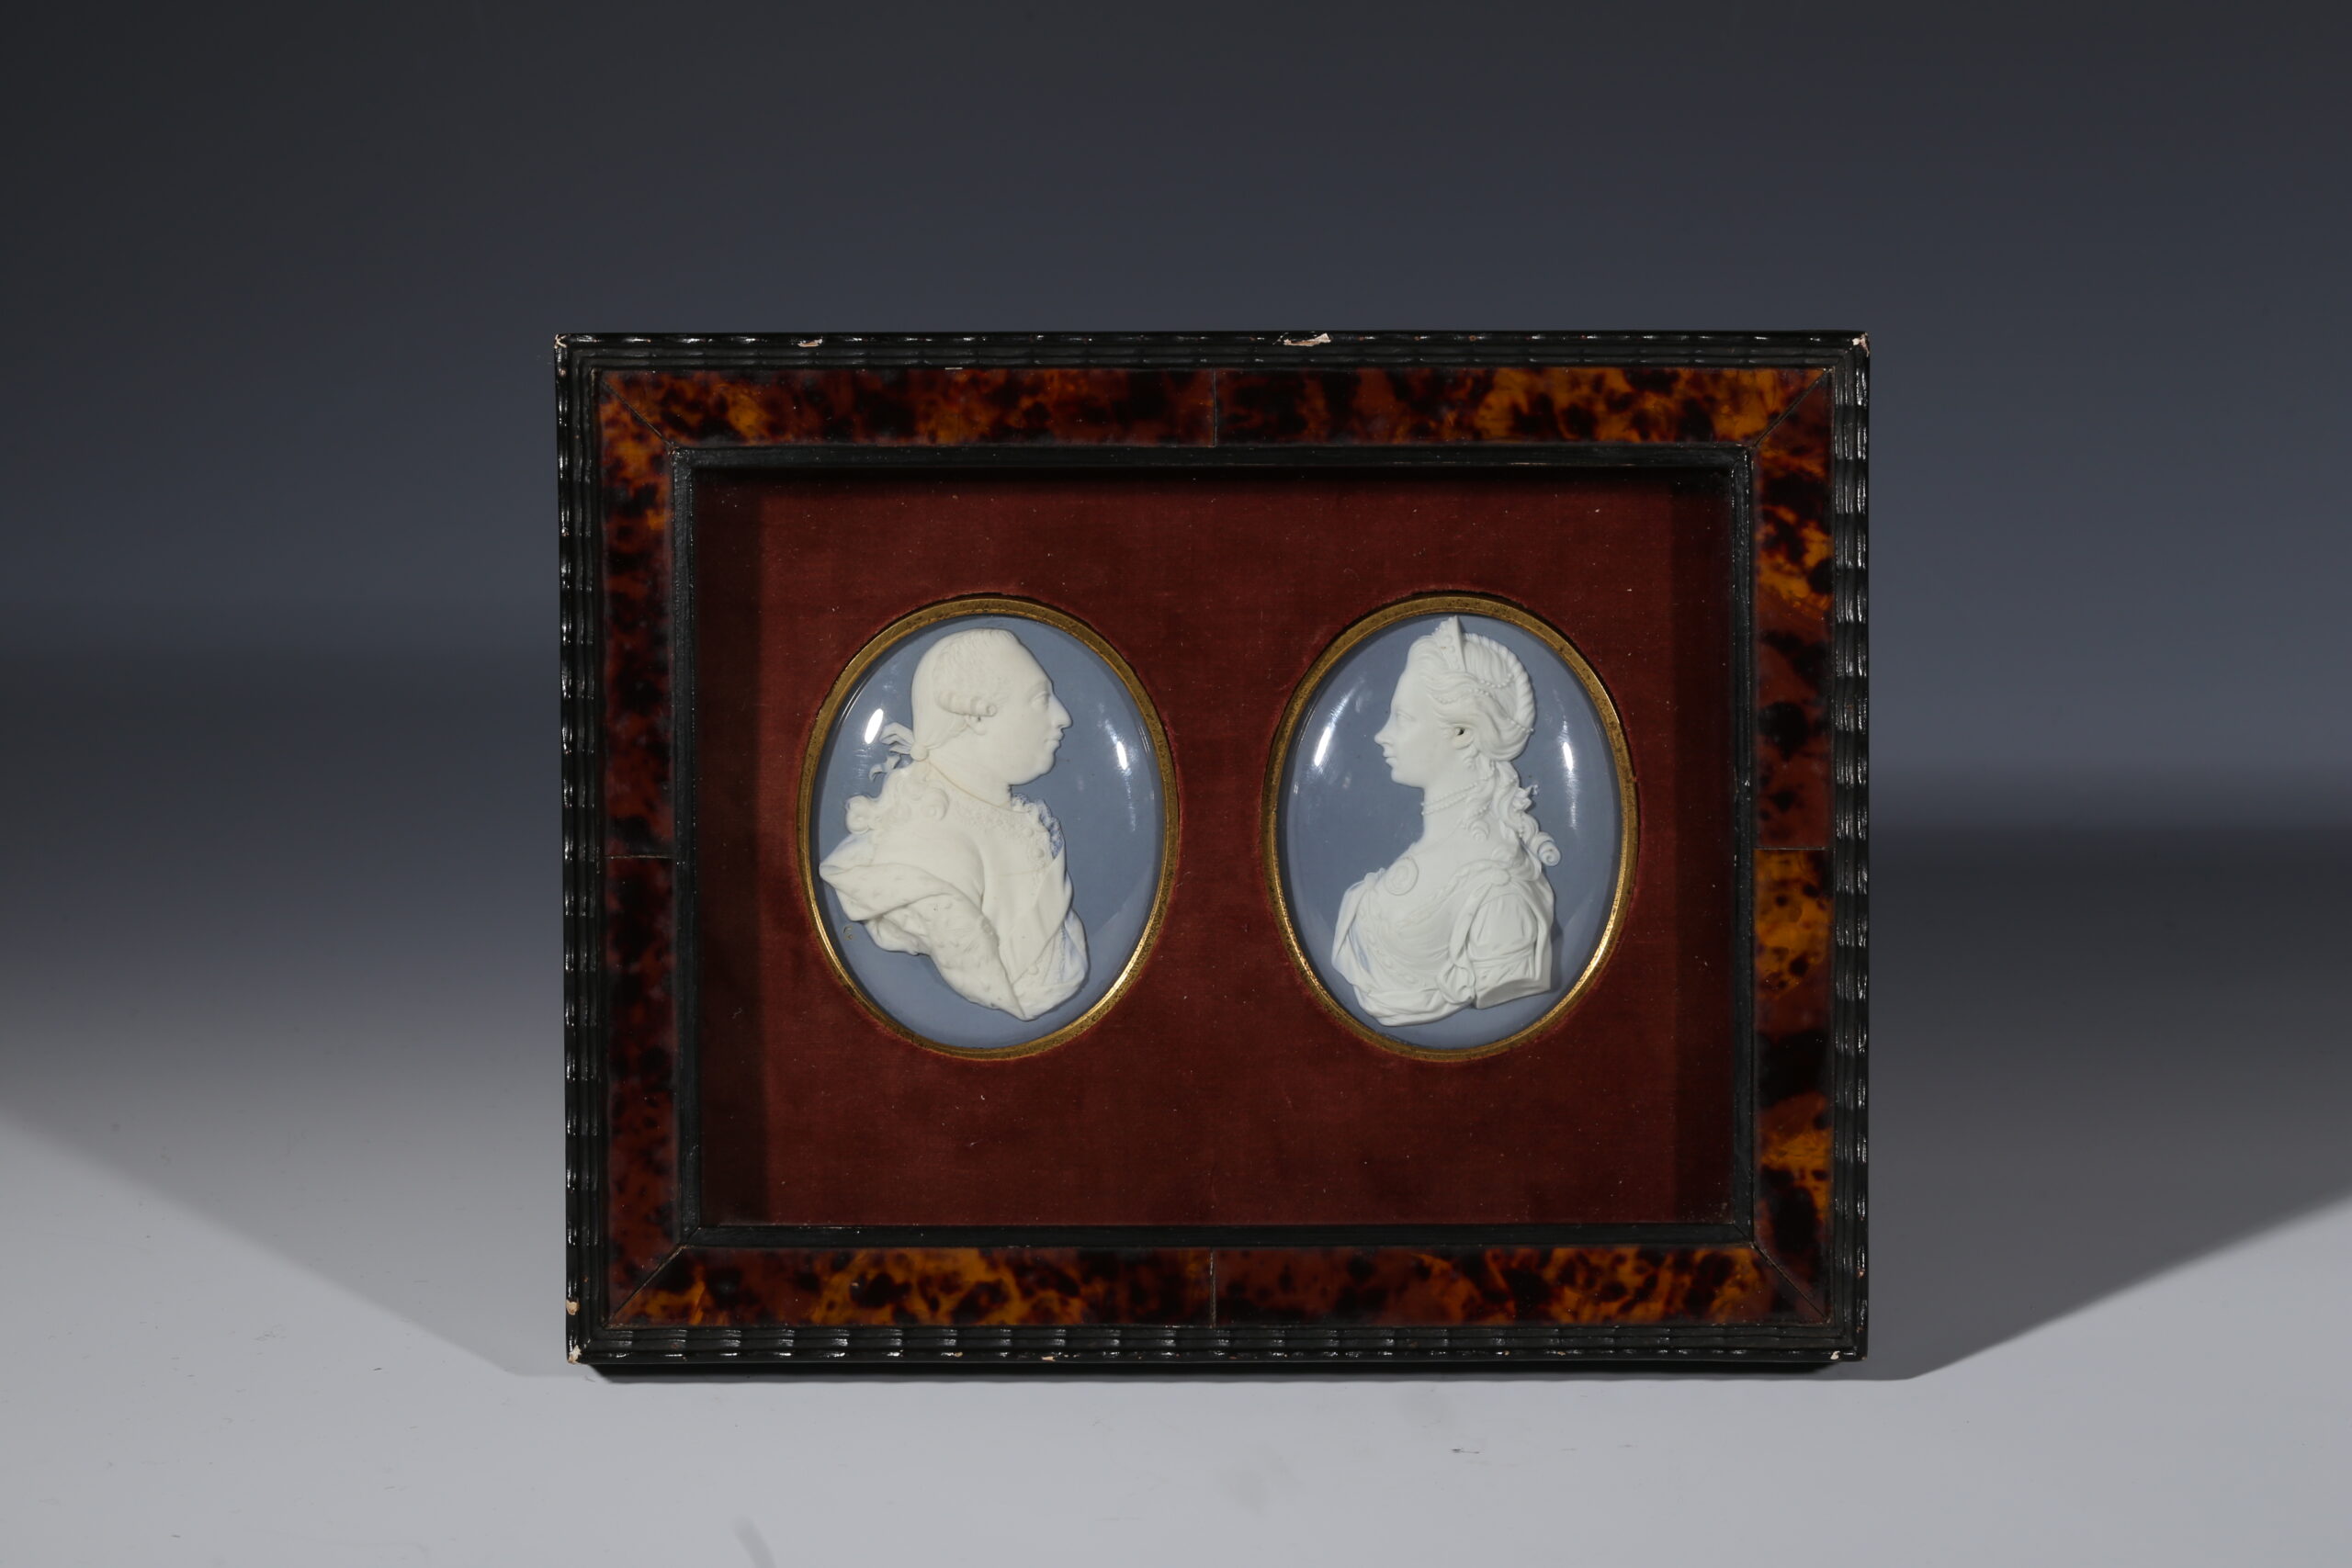 A pair of Wedgwood and Bentley medallions of George III and Queen Charlotte